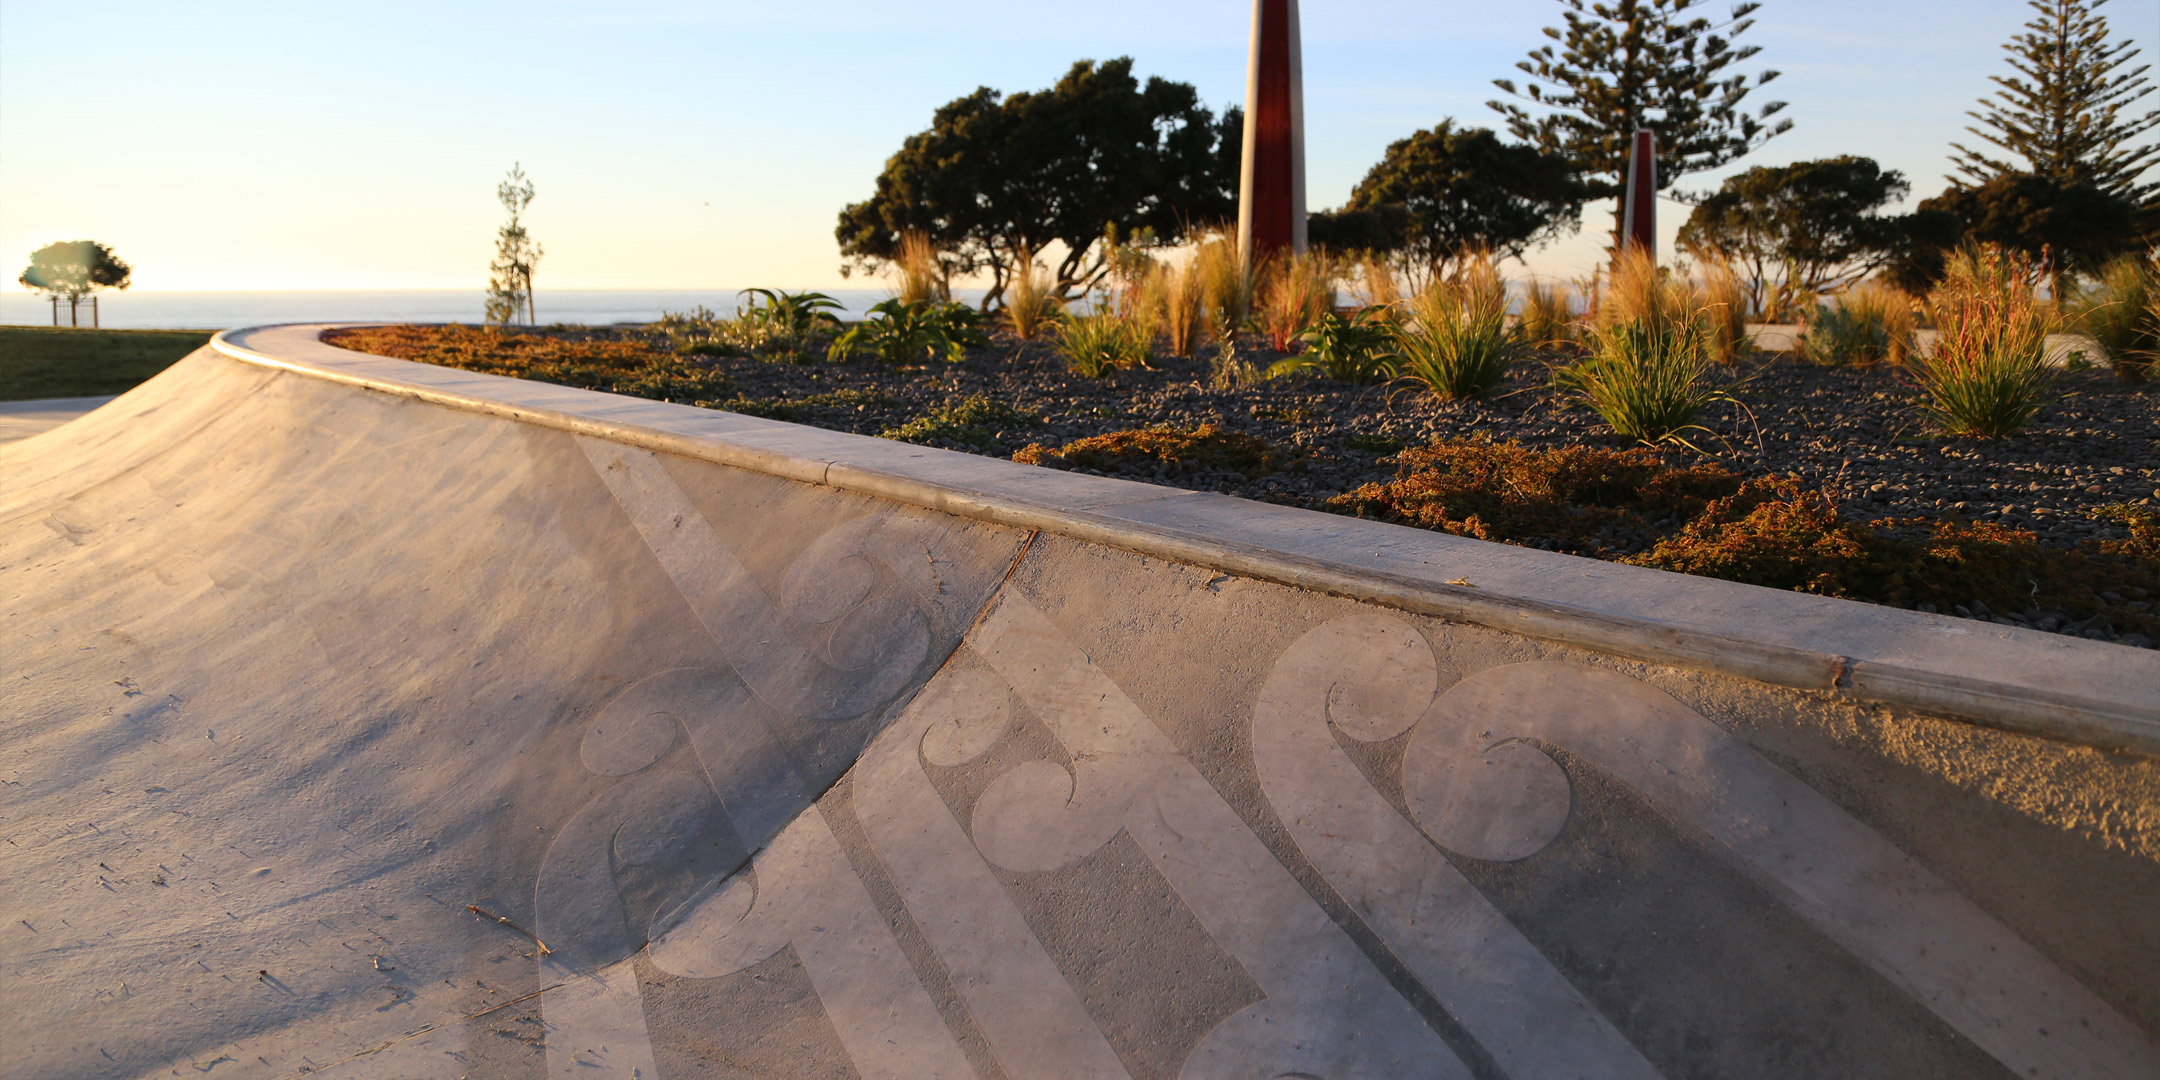 Award of Excellence | Parks | NZILA Resene Pride of Place Landscape Architecture Awards